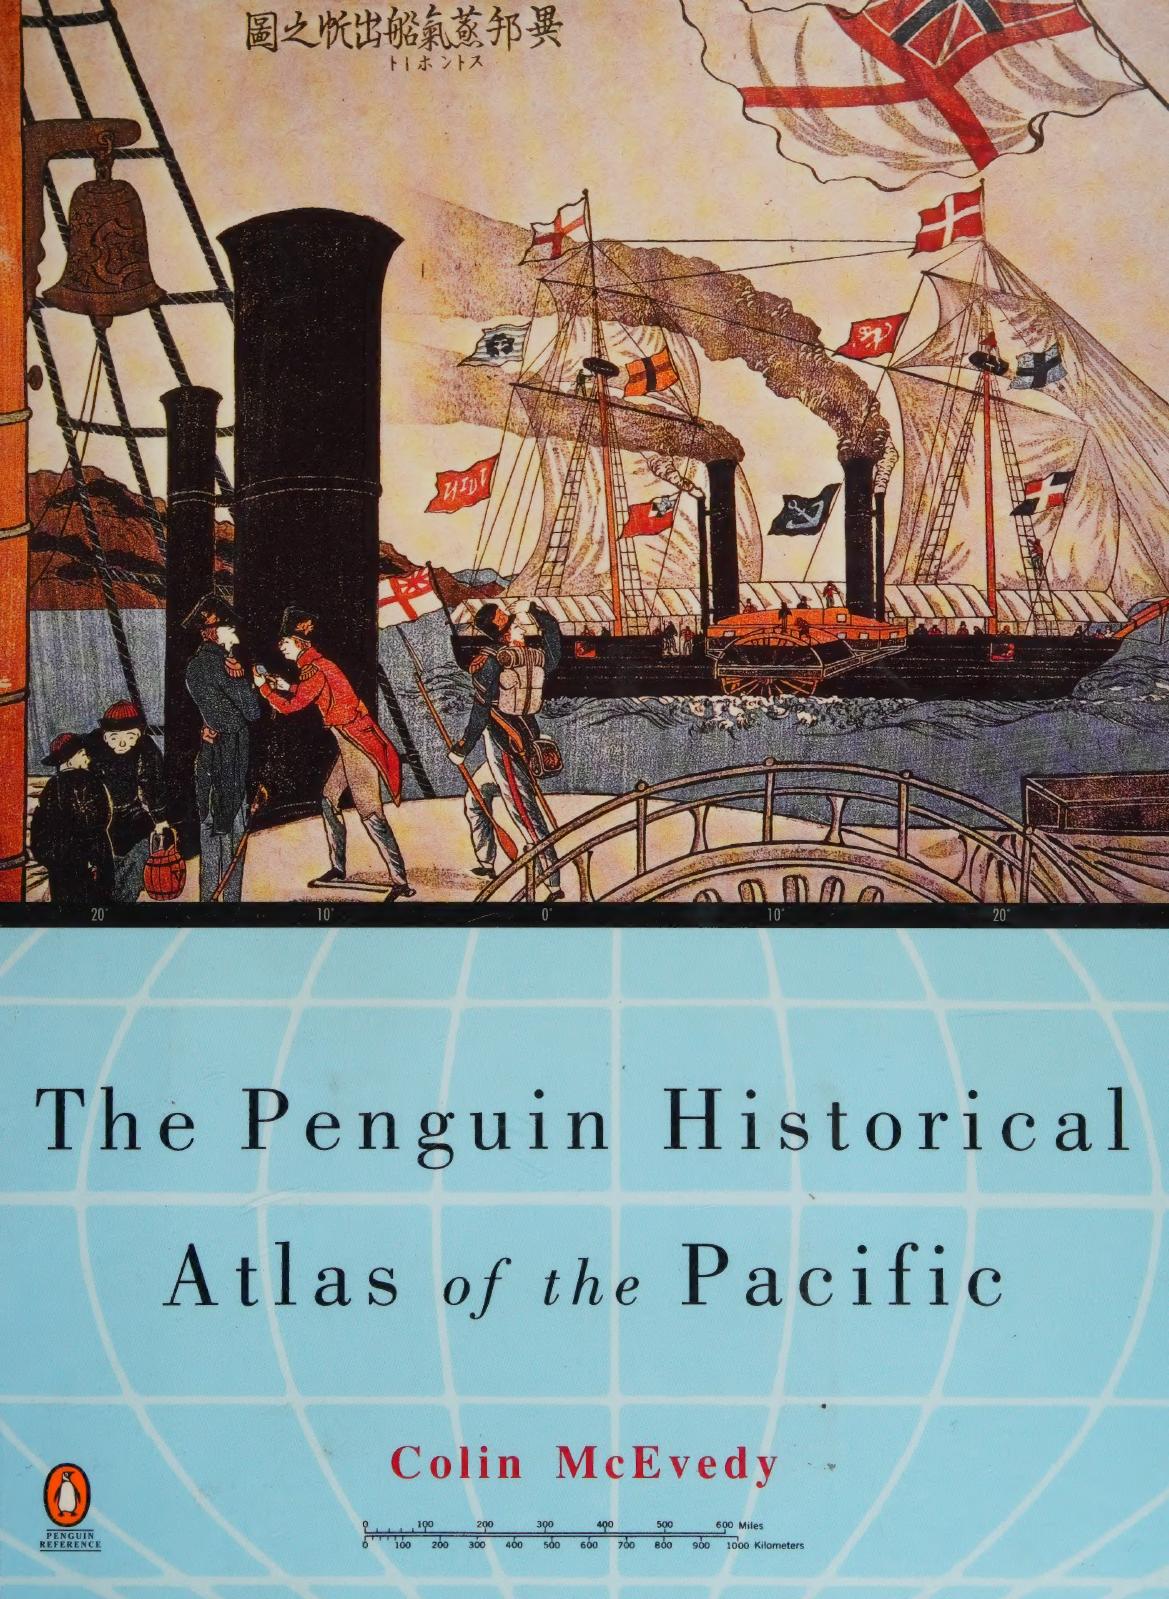 The Penguin historical atlas of the Pacific by Colin McEvedy